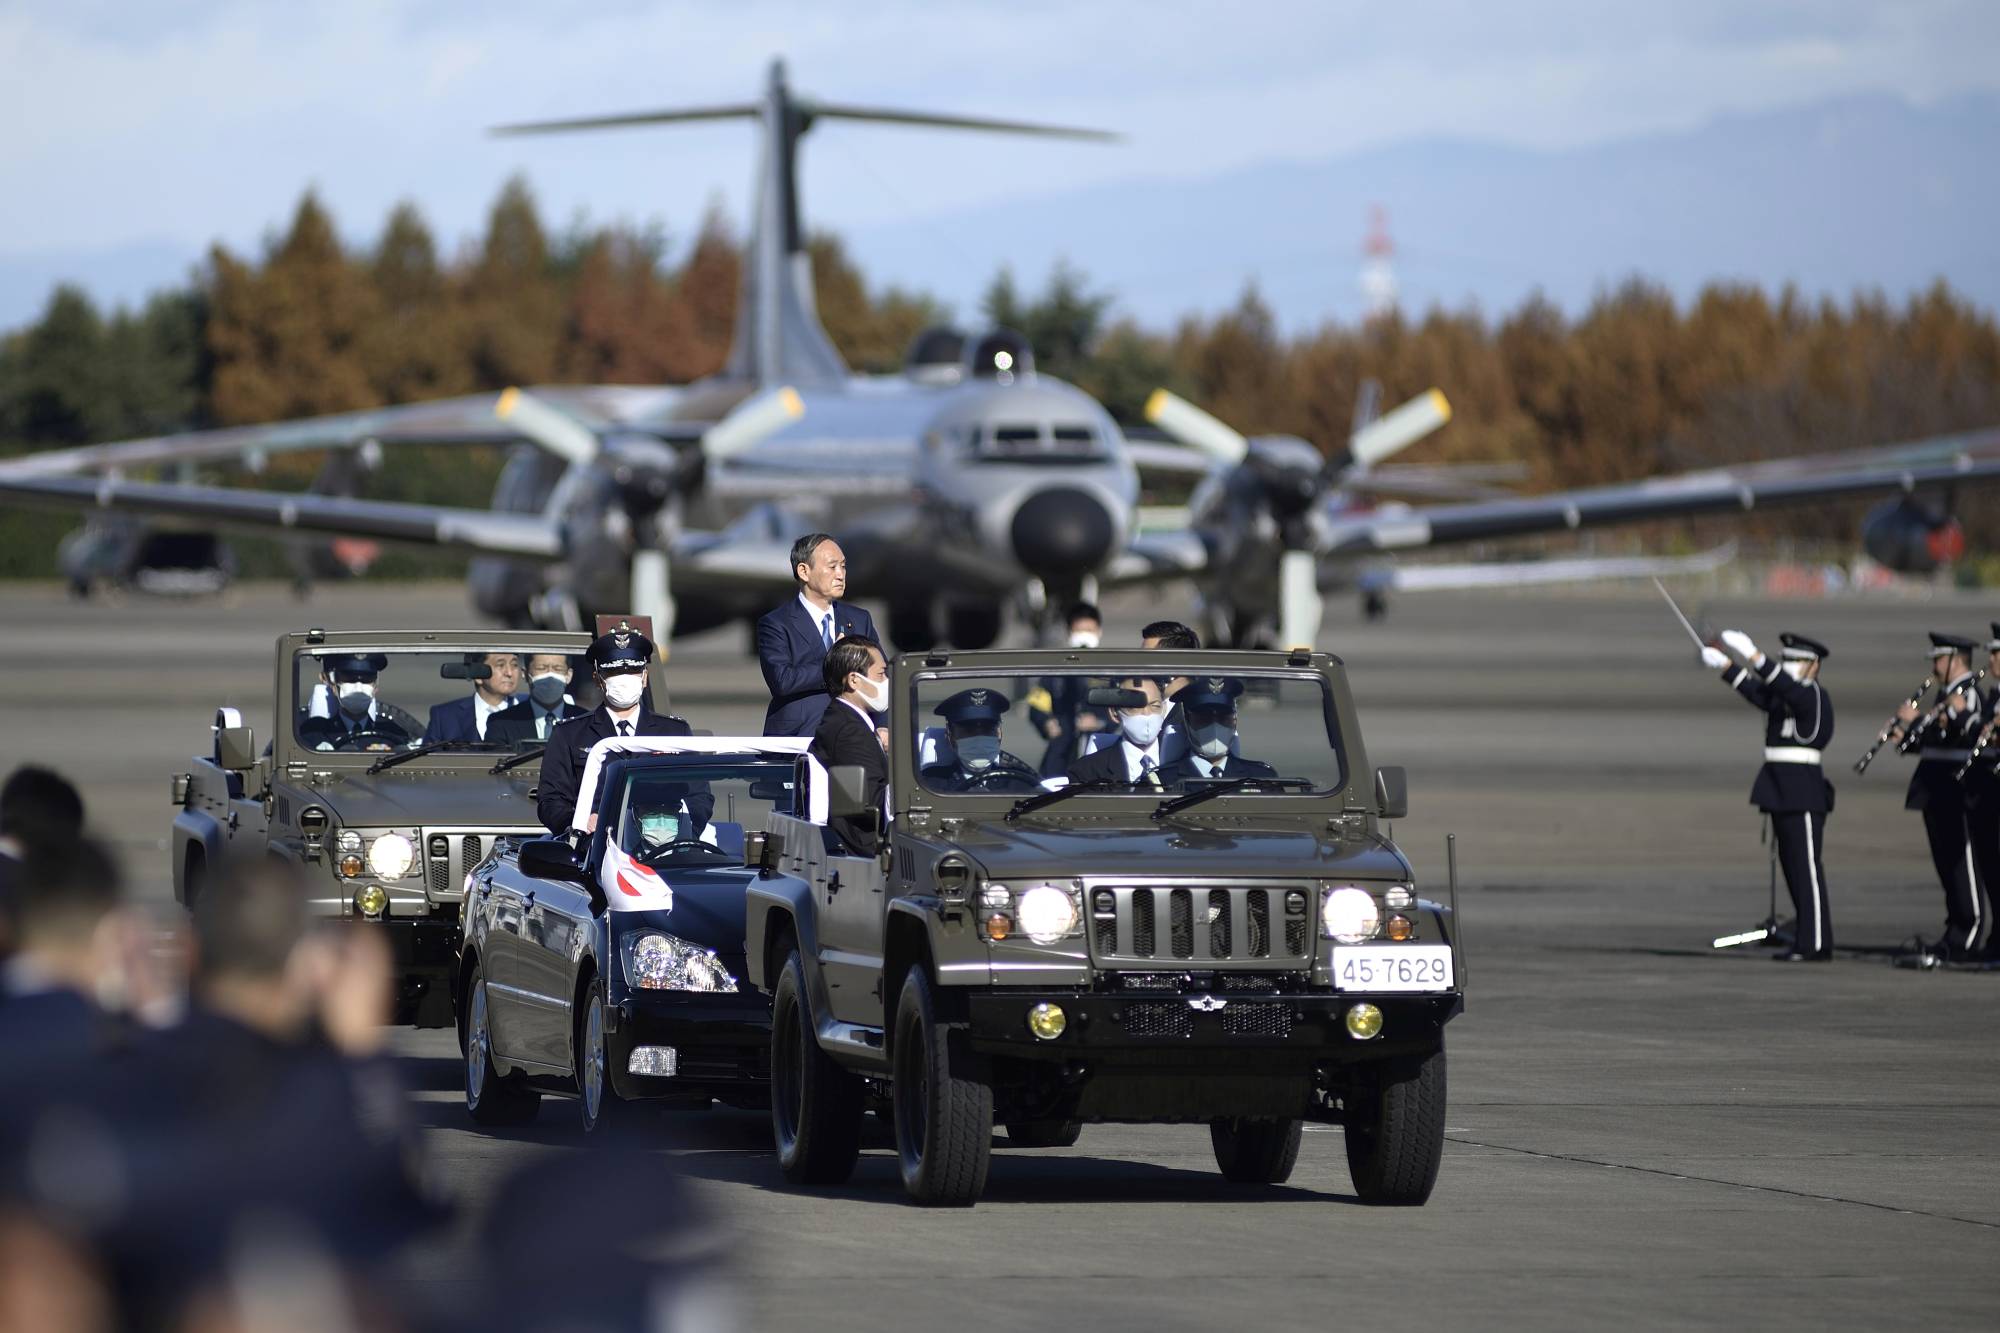 Prime Minister Yoshihide Suga conducts a review in November at Iruma Air Base in Sayama, Saitama Prefecture, operated by the Air Self-Defense Force. Suga's Cabinet approved a record defense budget for fiscal 2021 on Monday. | POOL / VIA REUTERS